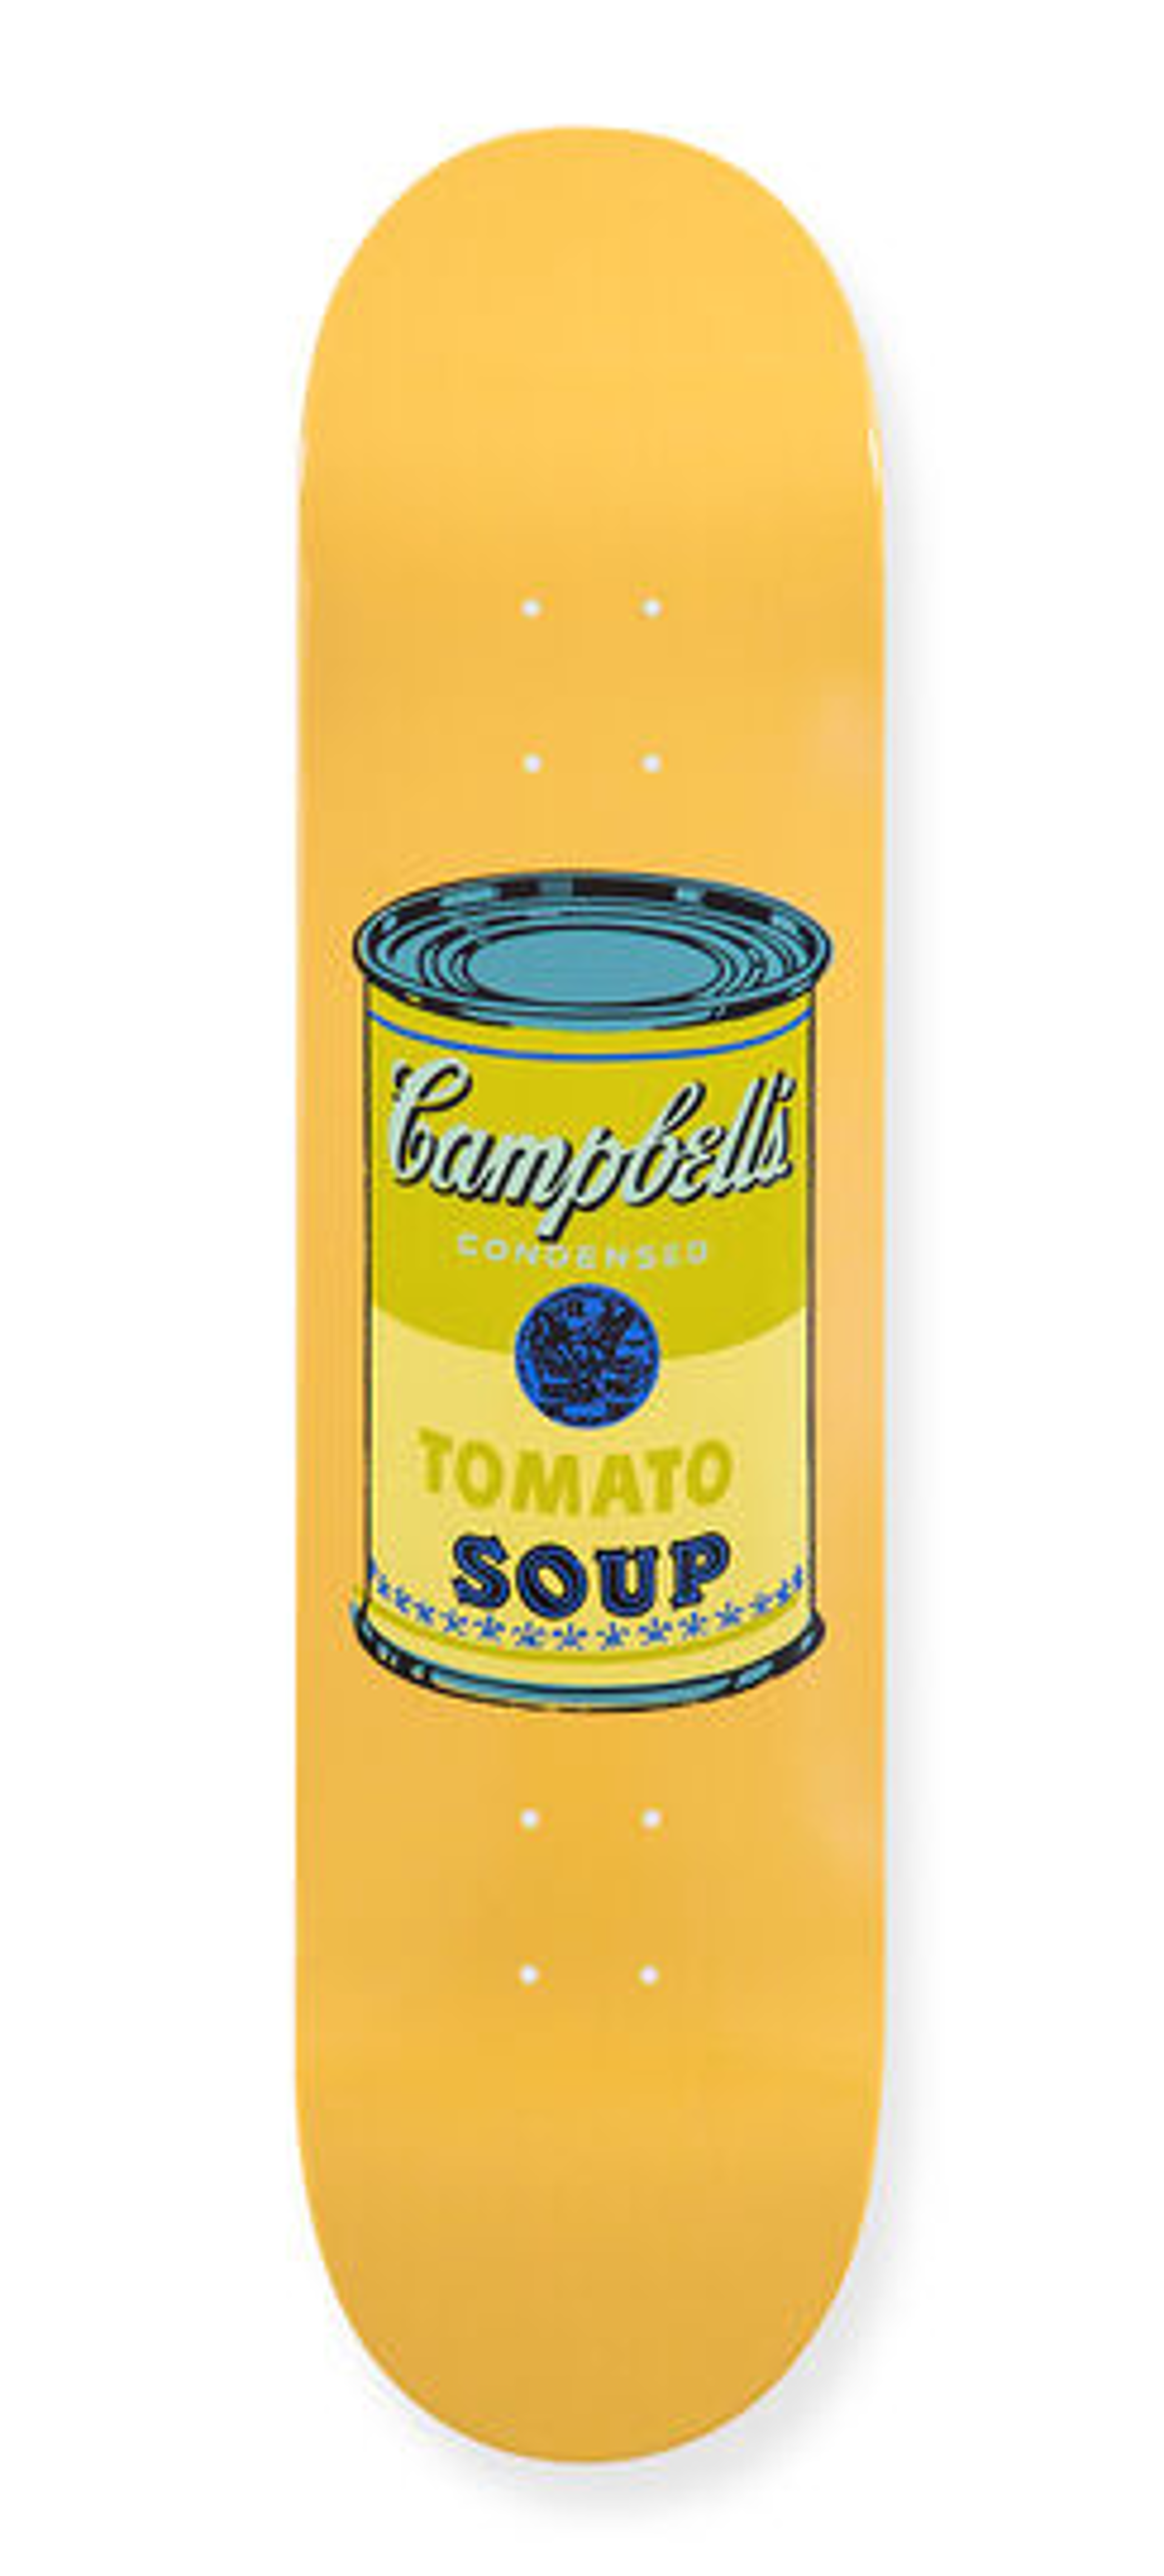 Campbell's Soup Skate Deck (Yellow with Yellow Can) by Andy Warhol